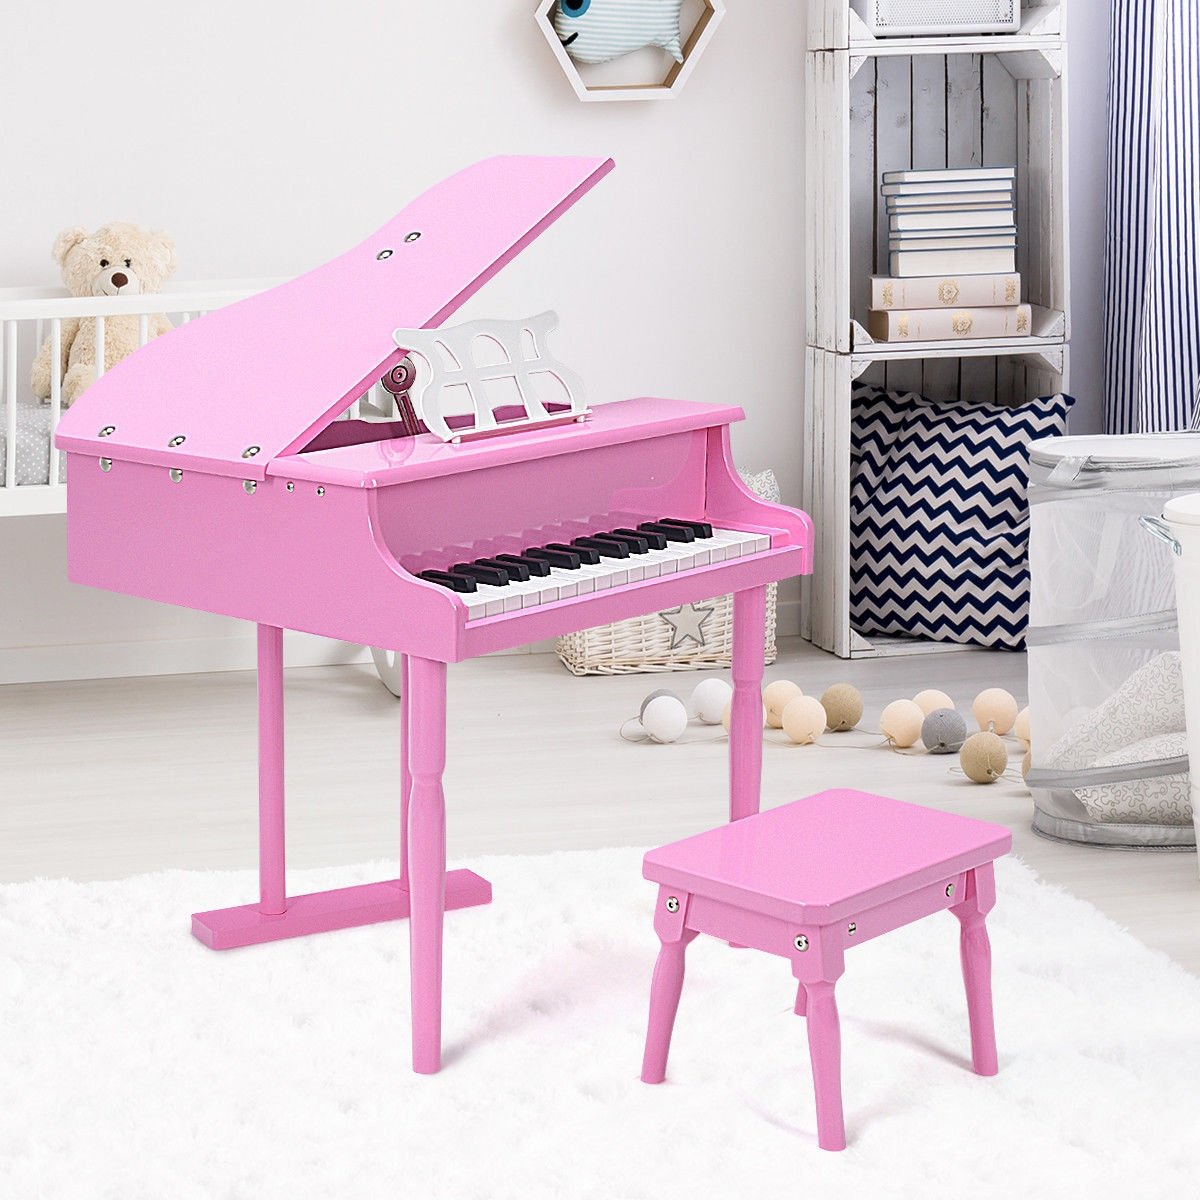 Musical Instrument Toy 30-Key Children Mini Grand Piano with Bench, Pink at Gallery Canada